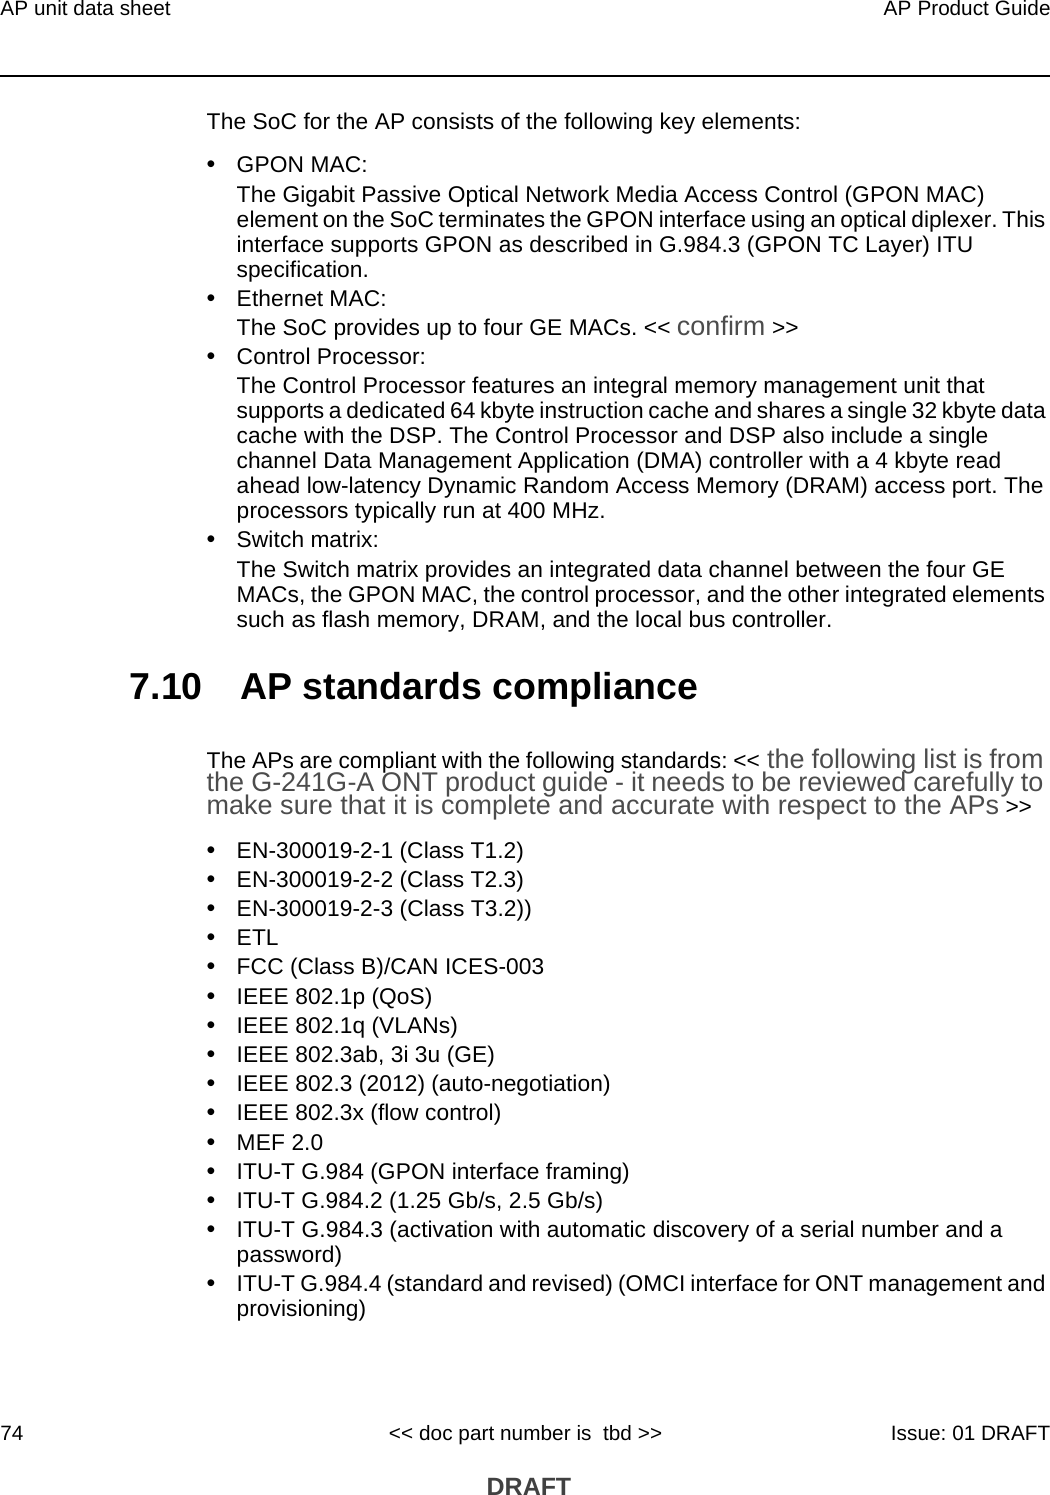 AP unit data sheet74AP Product Guide&lt;&lt; doc part number is  tbd &gt;&gt; Issue: 01 DRAFT DRAFTThe SoC for the AP consists of the following key elements:•GPON MAC:The Gigabit Passive Optical Network Media Access Control (GPON MAC) element on the SoC terminates the GPON interface using an optical diplexer. This interface supports GPON as described in G.984.3 (GPON TC Layer) ITU specification. •Ethernet MAC:The SoC provides up to four GE MACs. &lt;&lt; confirm &gt;&gt;•Control Processor:The Control Processor features an integral memory management unit that supports a dedicated 64 kbyte instruction cache and shares a single 32 kbyte data cache with the DSP. The Control Processor and DSP also include a single channel Data Management Application (DMA) controller with a 4 kbyte read ahead low-latency Dynamic Random Access Memory (DRAM) access port. The processors typically run at 400 MHz. •Switch matrix:The Switch matrix provides an integrated data channel between the four GE MACs, the GPON MAC, the control processor, and the other integrated elements such as flash memory, DRAM, and the local bus controller.7.10 AP standards complianceThe APs are compliant with the following standards: &lt;&lt; the following list is from the G-241G-A ONT product guide - it needs to be reviewed carefully to make sure that it is complete and accurate with respect to the APs &gt;&gt; •EN-300019-2-1 (Class T1.2)•EN-300019-2-2 (Class T2.3)•EN-300019-2-3 (Class T3.2))•ETL•FCC (Class B)/CAN ICES-003•IEEE 802.1p (QoS)•IEEE 802.1q (VLANs)•IEEE 802.3ab, 3i 3u (GE)•IEEE 802.3 (2012) (auto-negotiation)•IEEE 802.3x (flow control)•MEF 2.0•ITU-T G.984 (GPON interface framing)•ITU-T G.984.2 (1.25 Gb/s, 2.5 Gb/s)•ITU-T G.984.3 (activation with automatic discovery of a serial number and a password)•ITU-T G.984.4 (standard and revised) (OMCI interface for ONT management and provisioning)